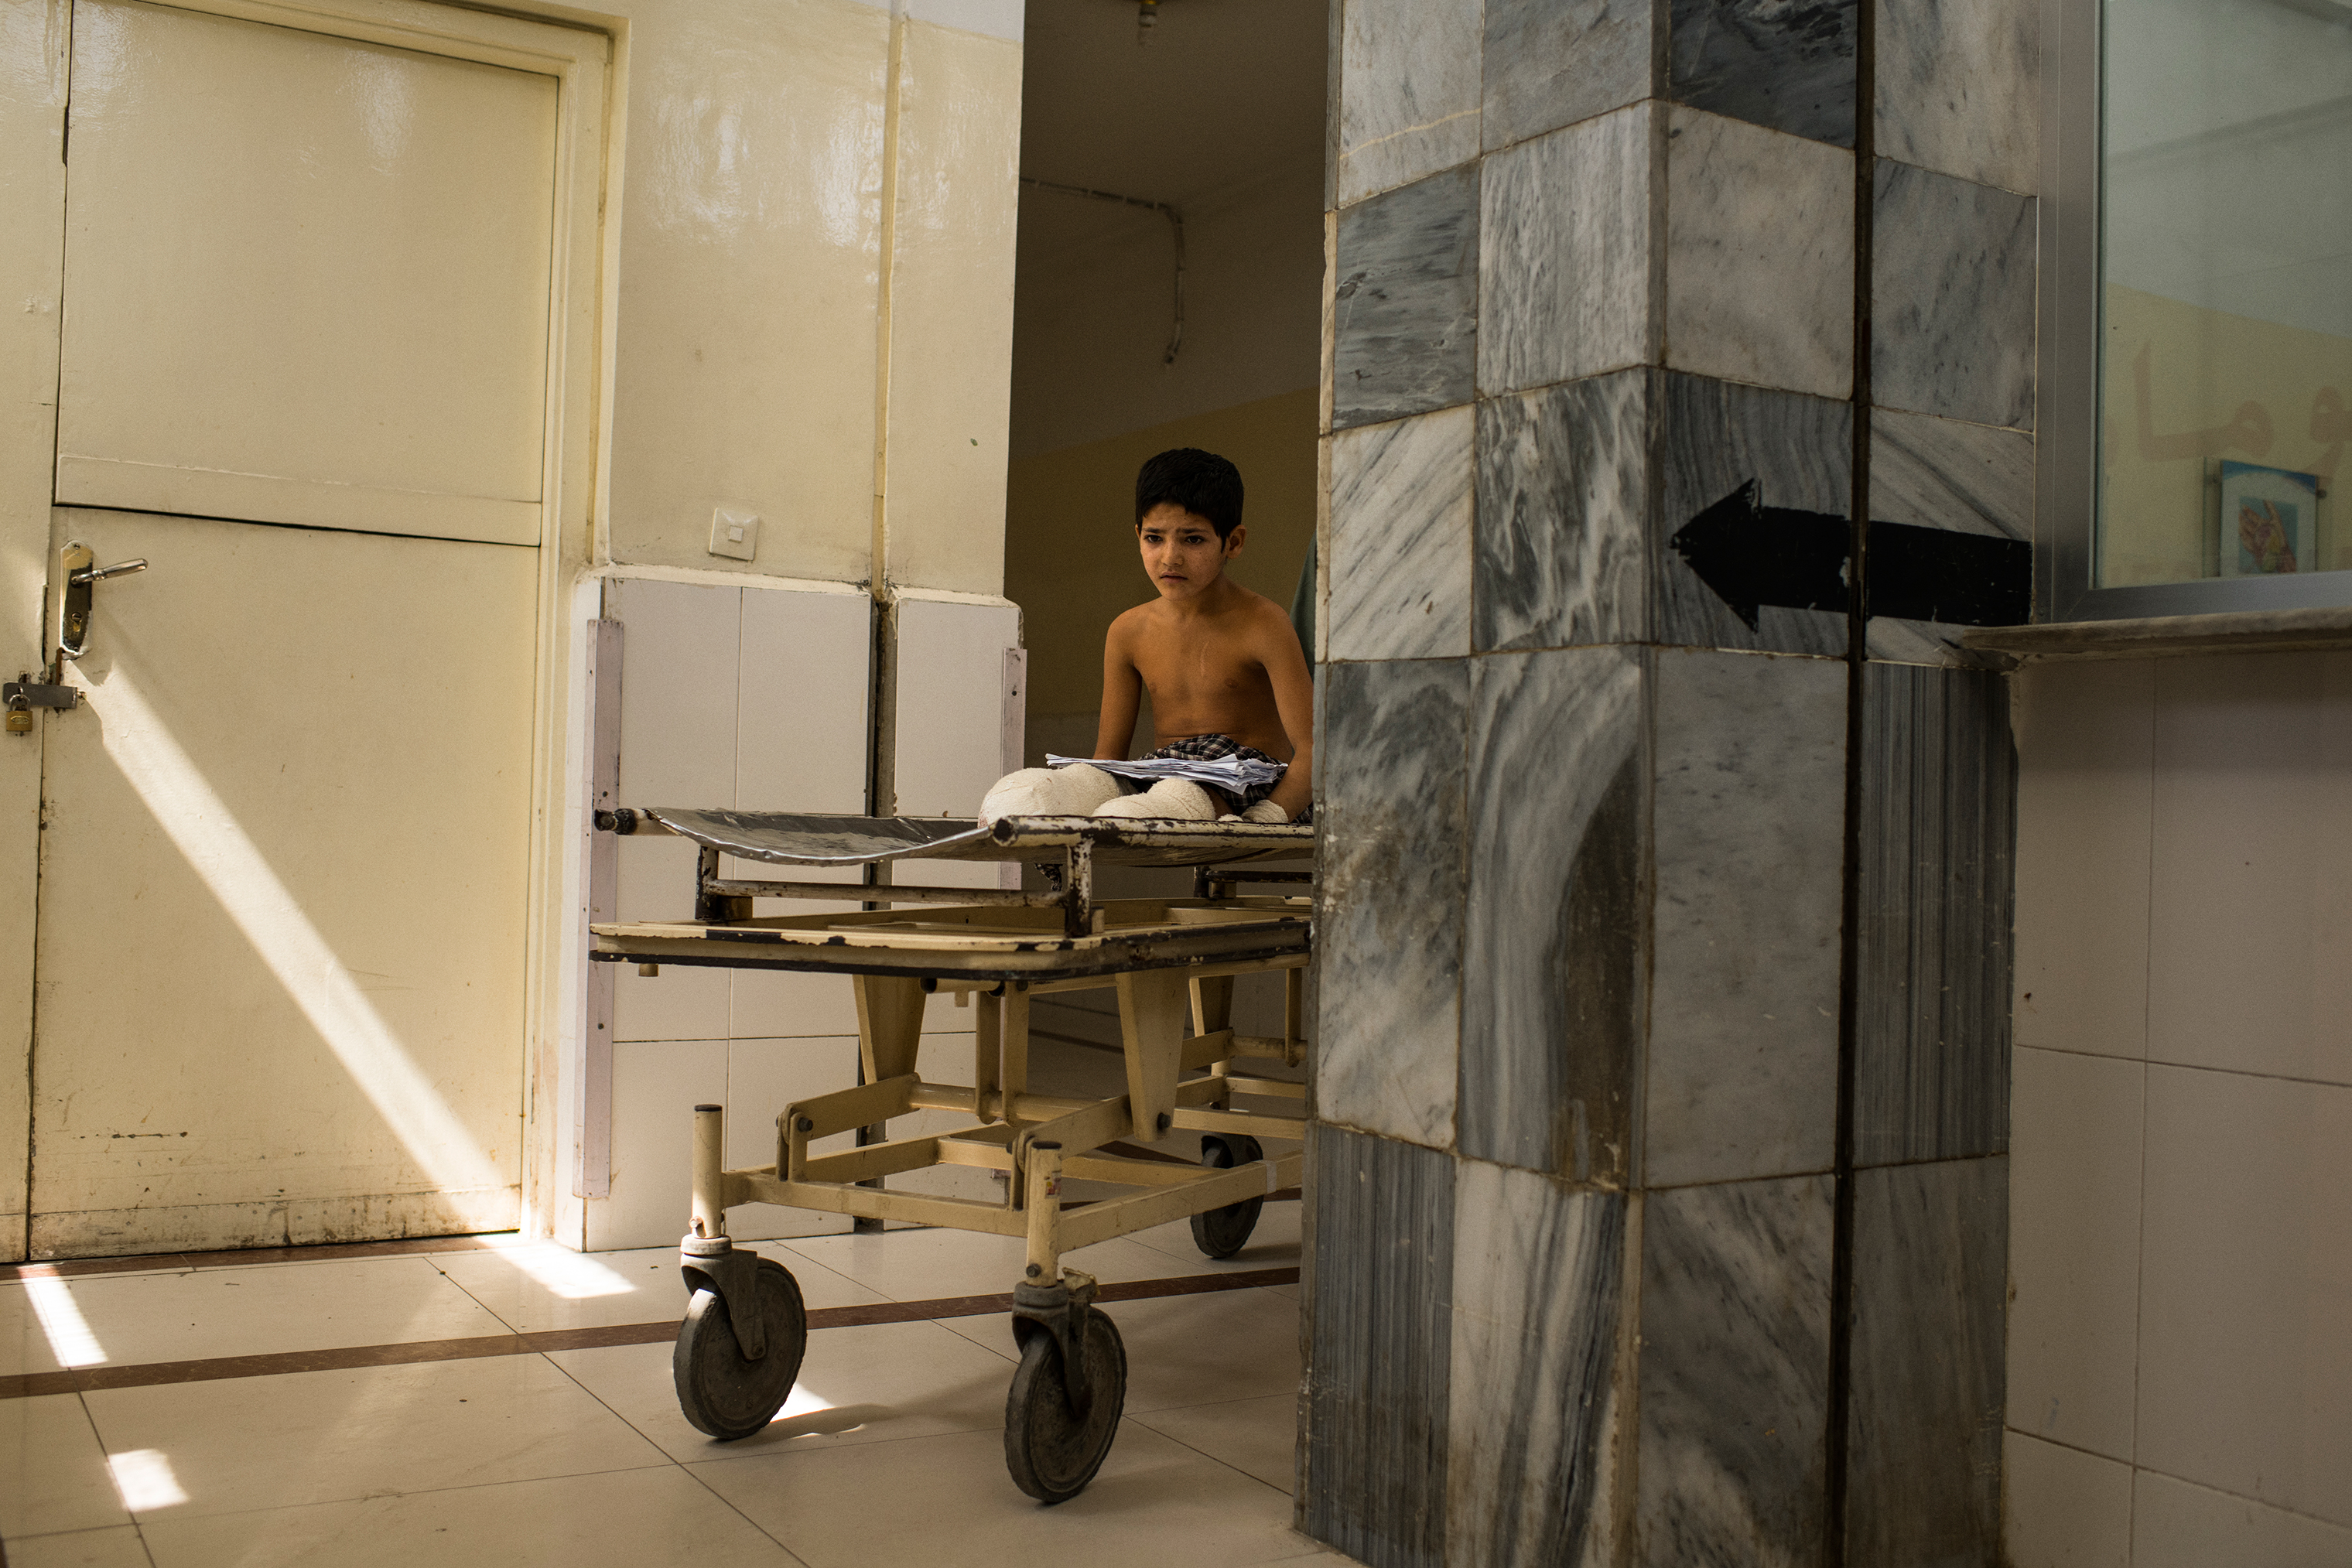 Abdul Rashid is pushed by his father, Hamisha Gul, on a gurney before a surgery. (Andrew Quilty for TIME)